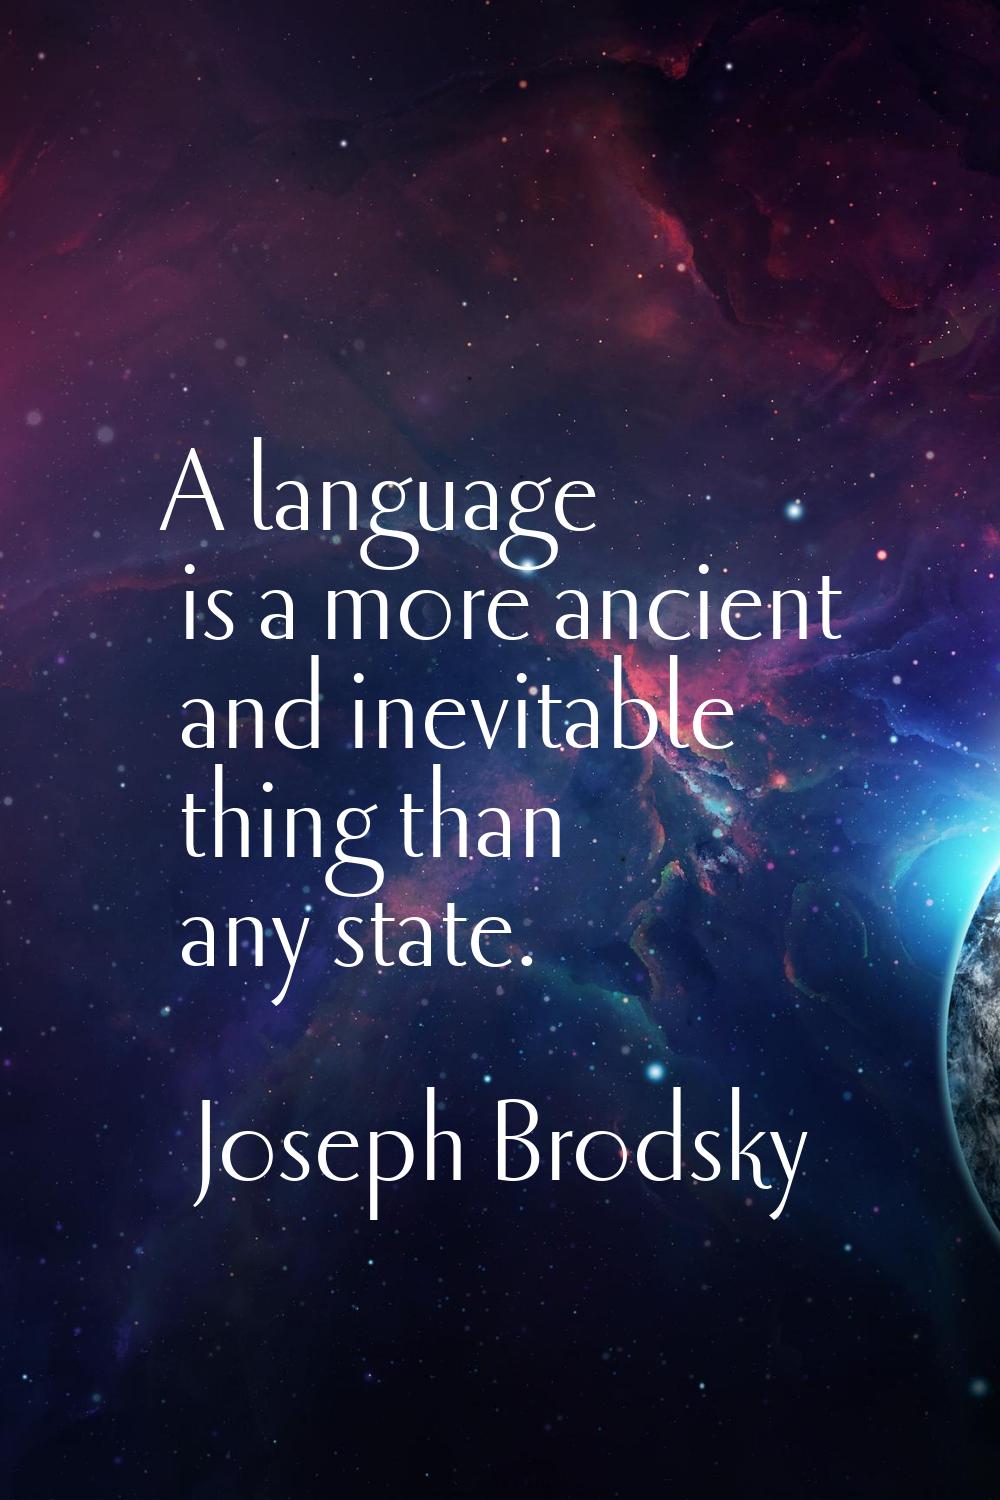 A language is a more ancient and inevitable thing than any state.